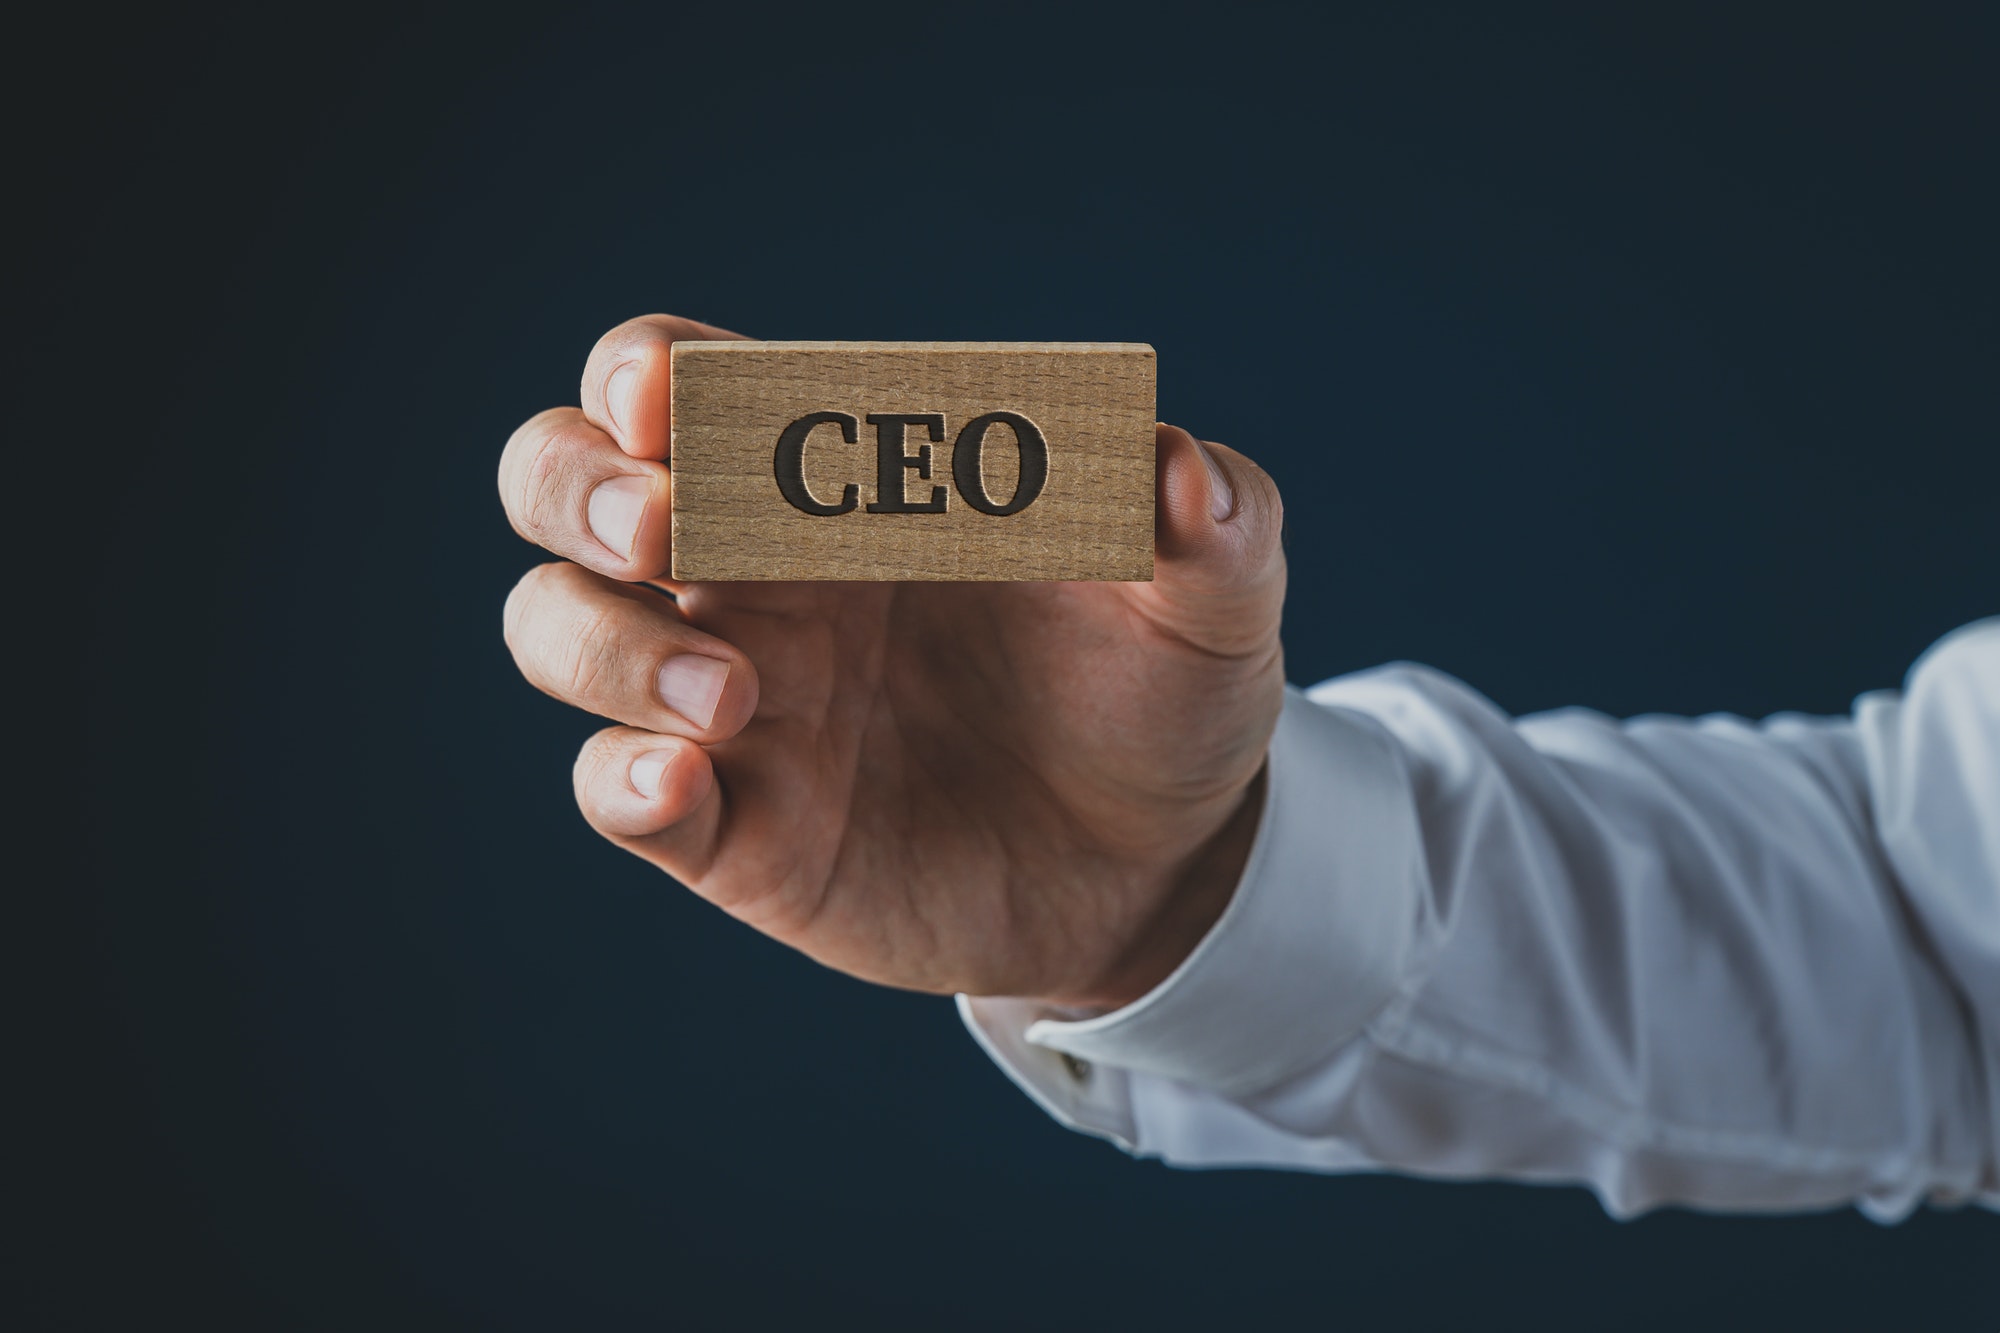 Businessman showing a wooden identity card with the word CEO on it